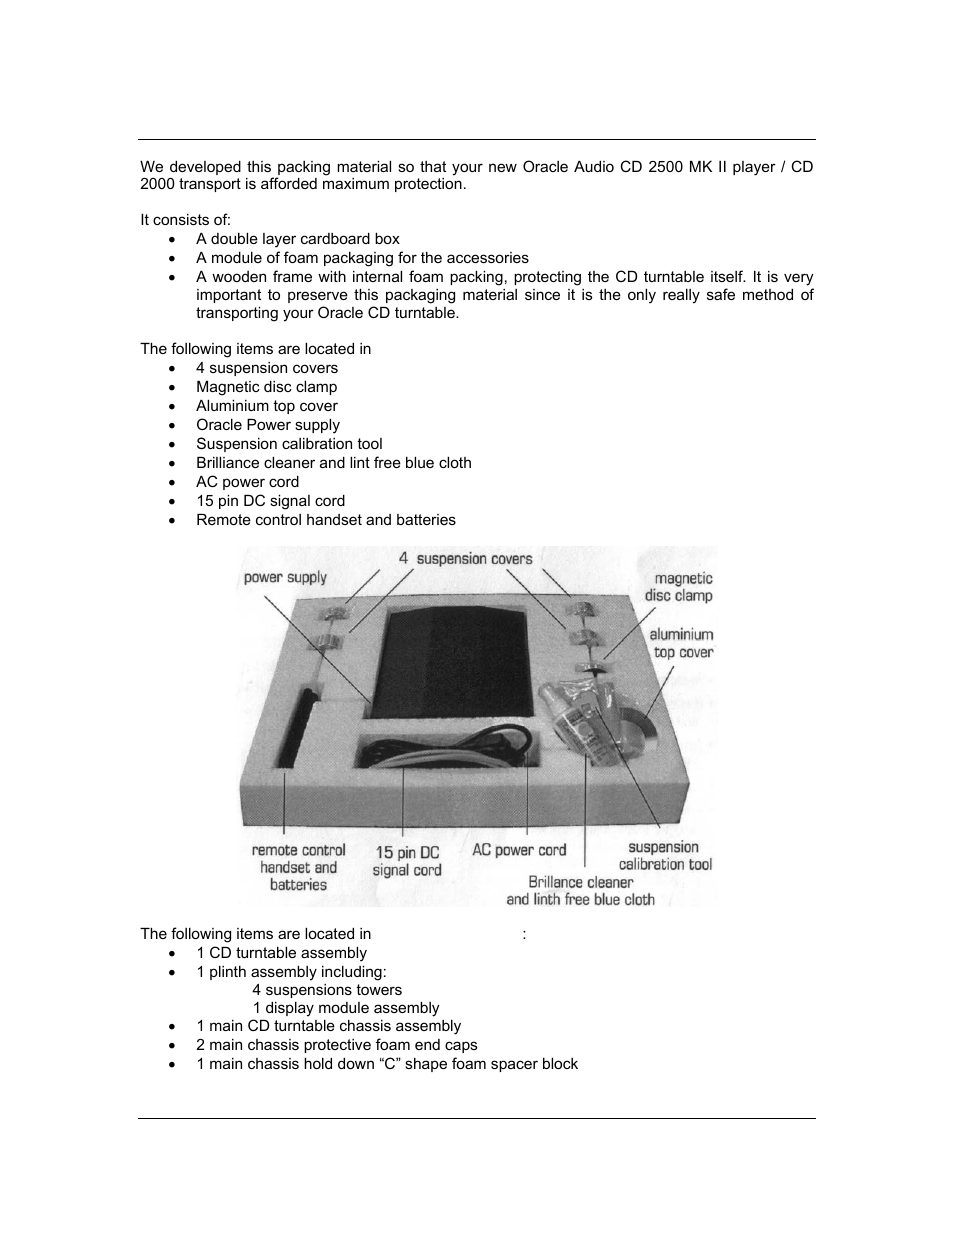 Content | Oracle Audio Technologies CD 2000 User Manual | Page 4 / 21